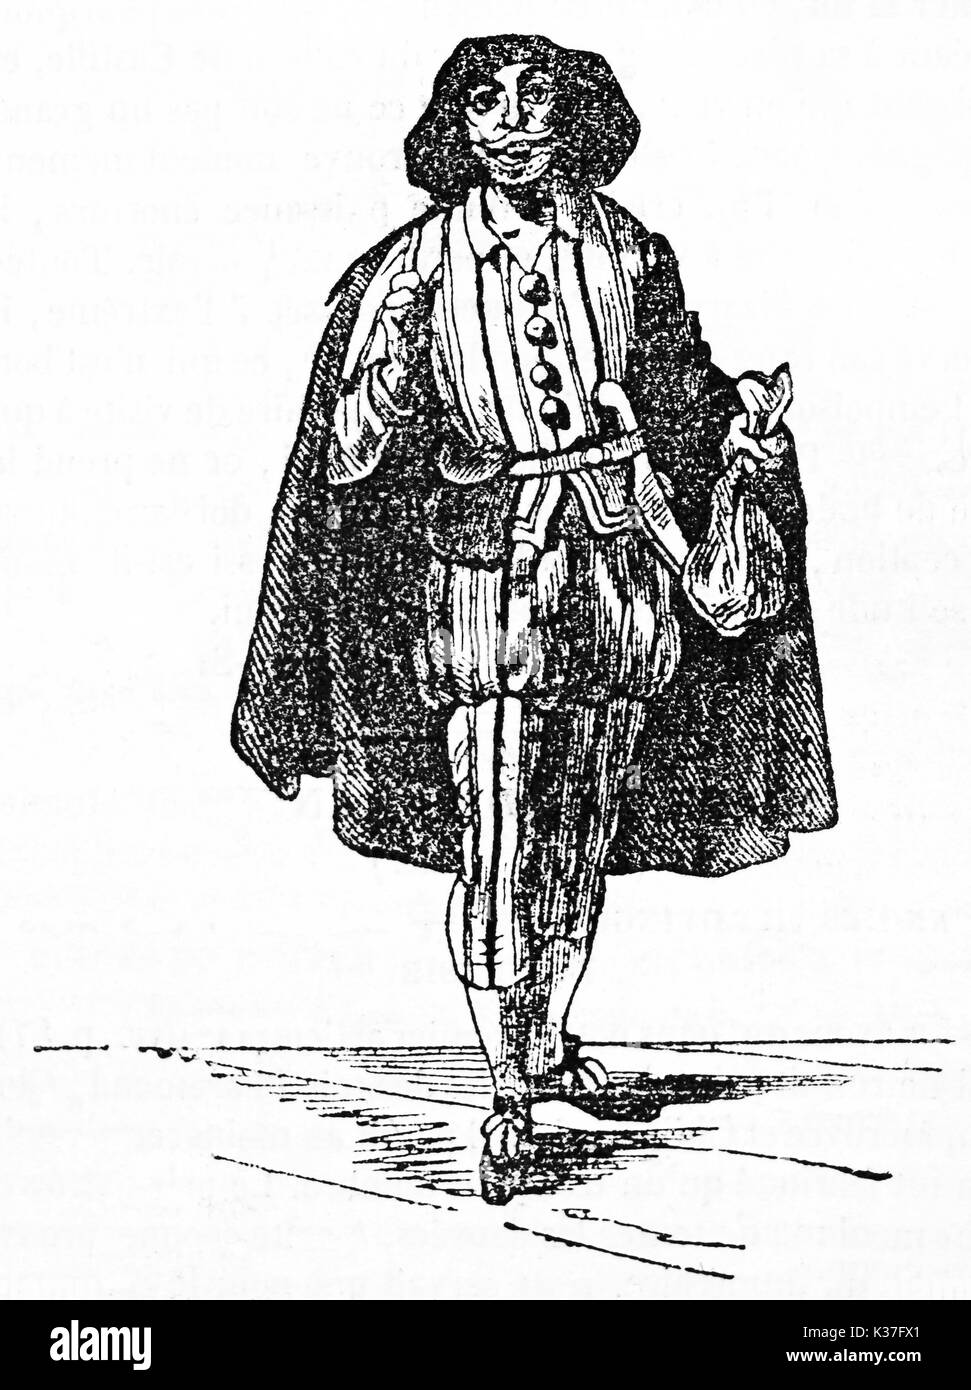 Ancient full body portrait of Jodelet (Julien Bedeau 1586 - 1660), French actor, in his scene costume on stage. Old Illustration by unidentified author published on Magasin Pittoresque Paris 1834 Stock Photo